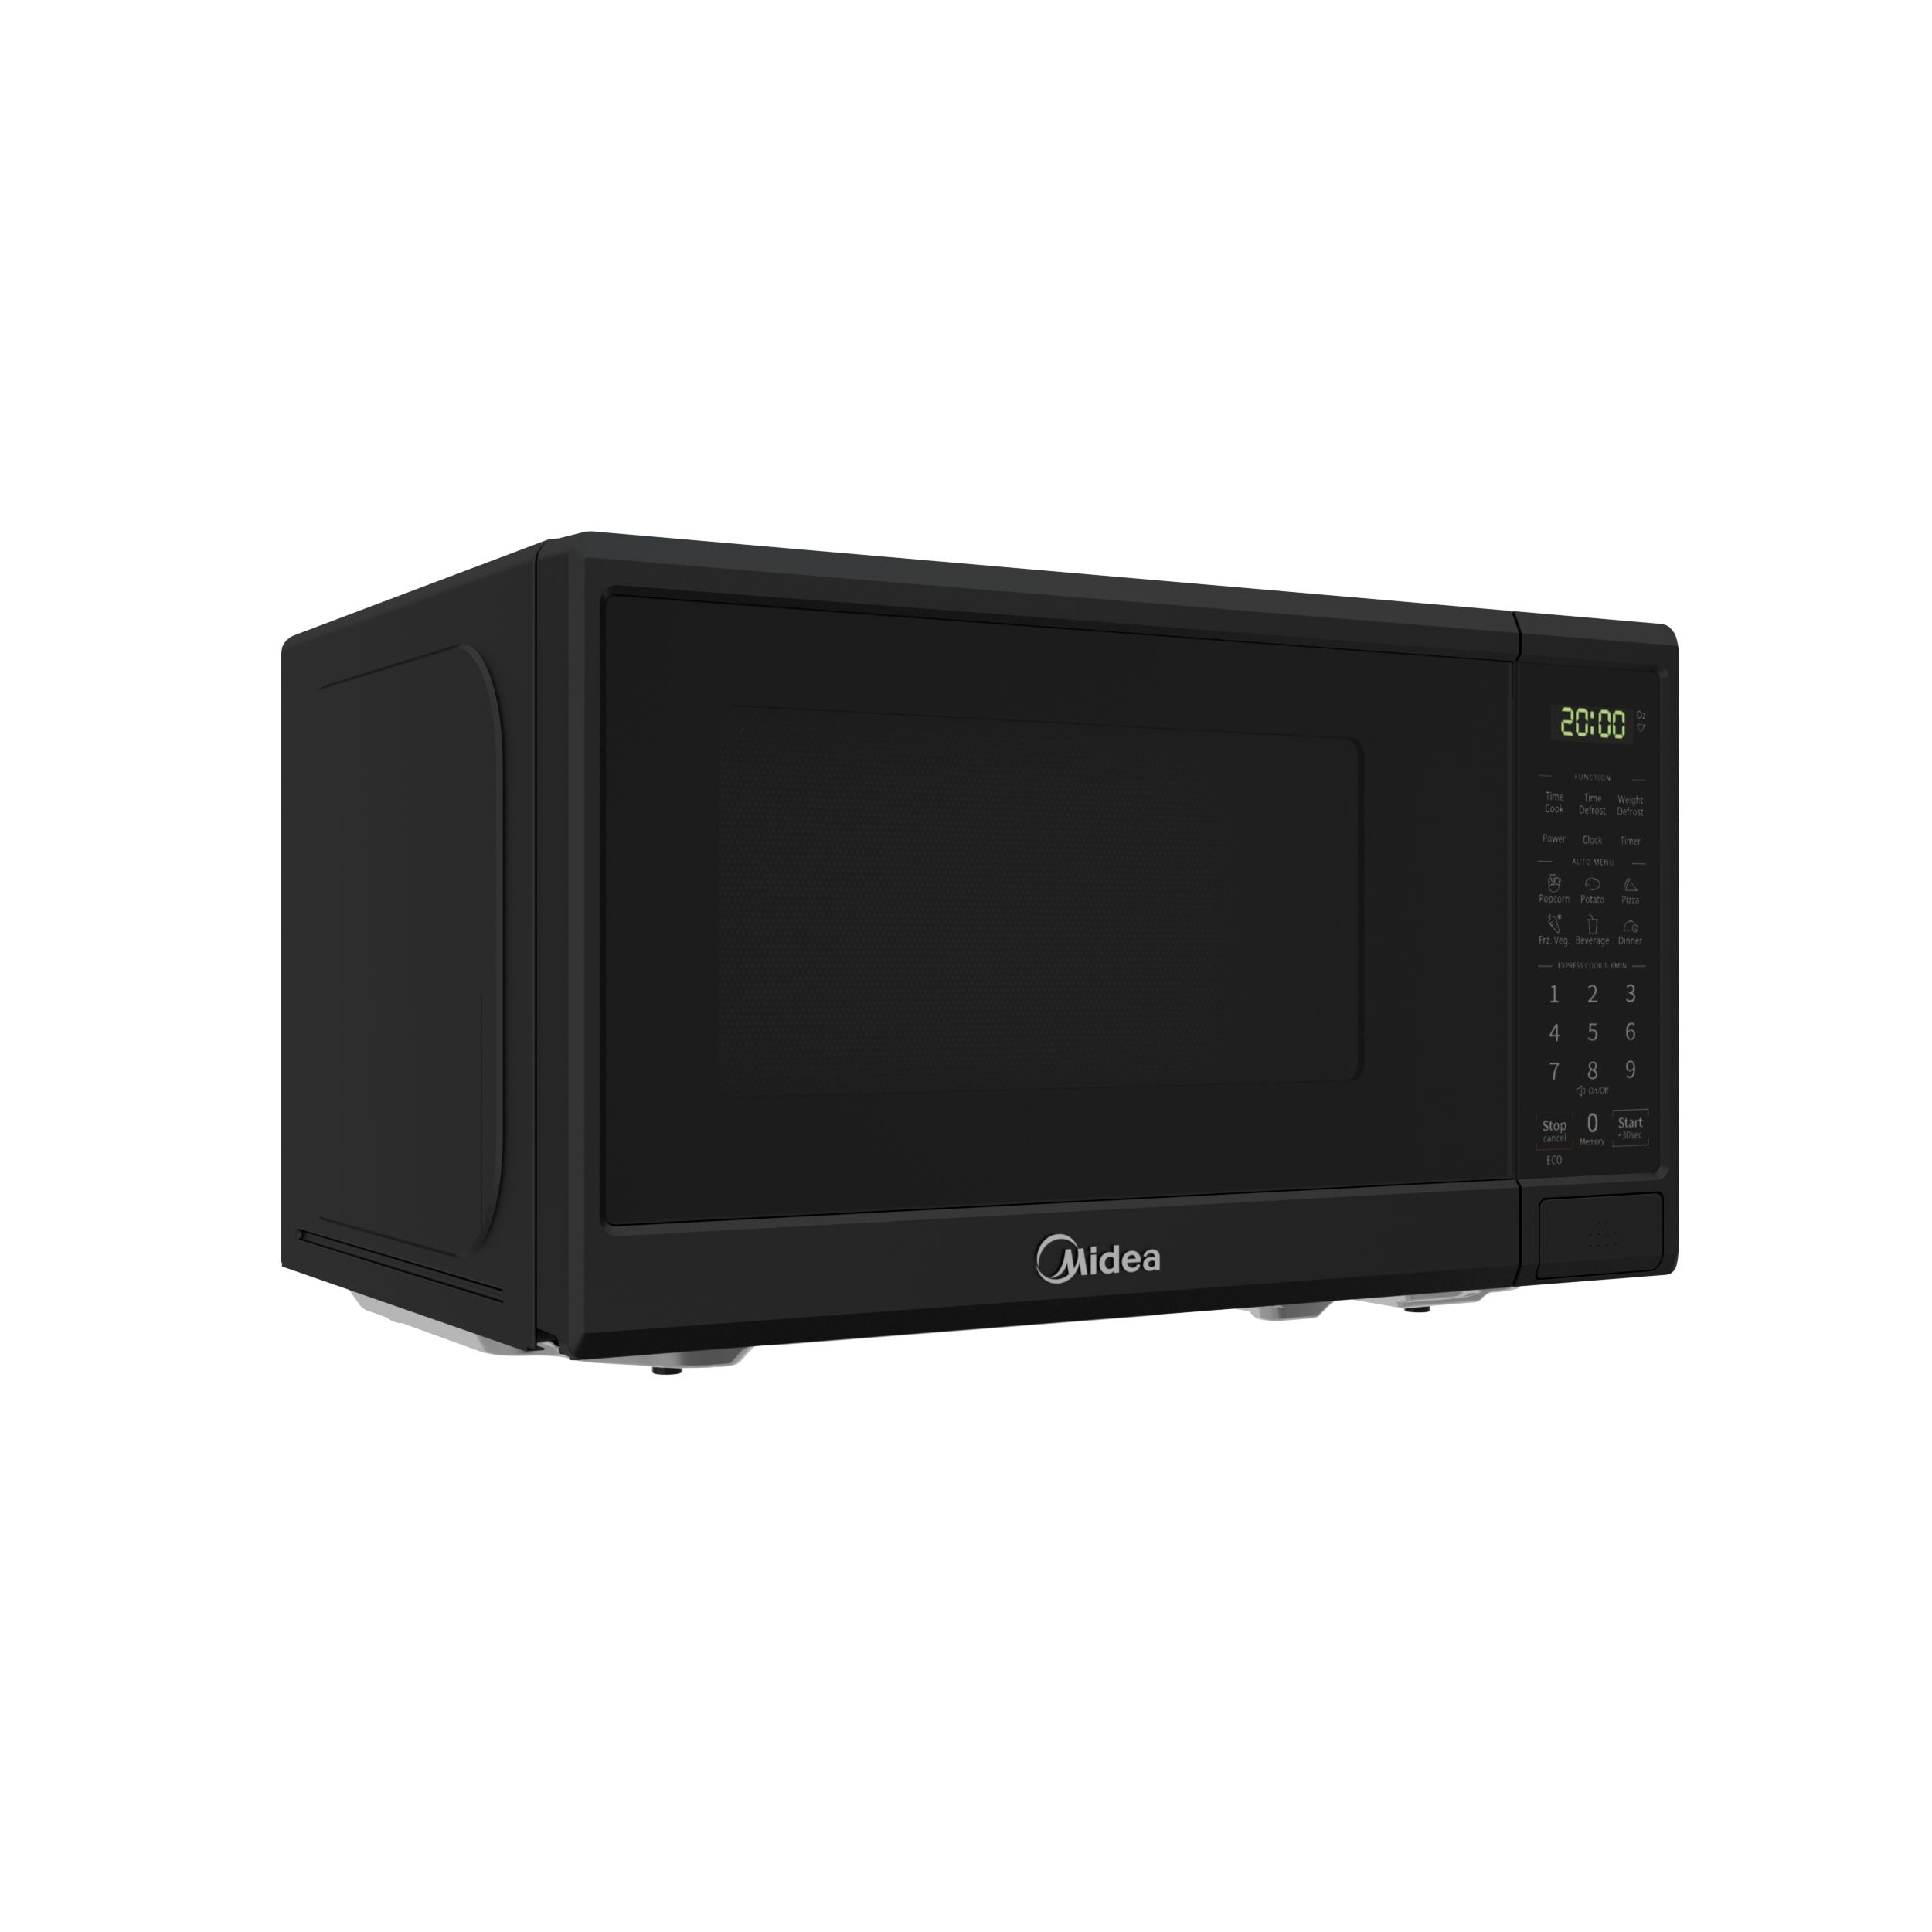 Simply Perfect 0.7 Cu. Ft. Microwave Oven Black, Microwave Ovens, Furniture & Appliances